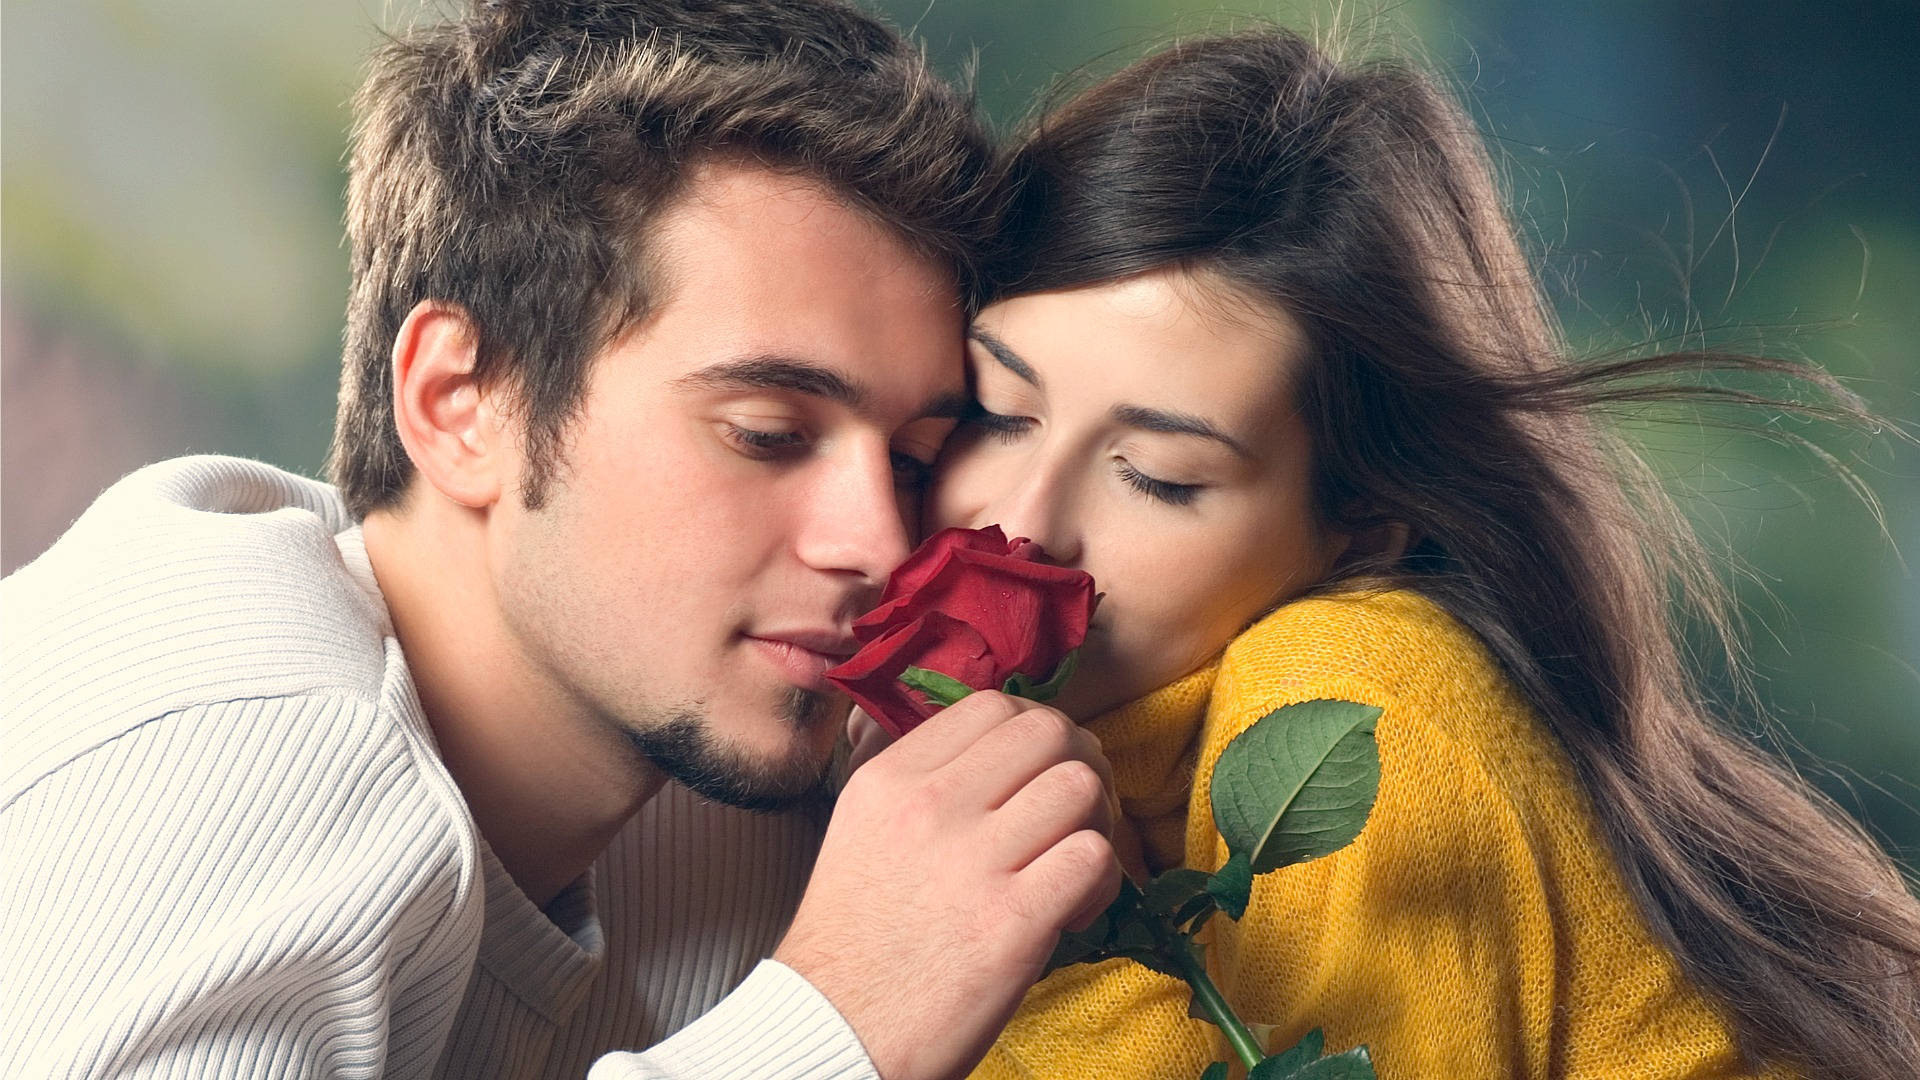 Couple With Rose Romantic Love Background